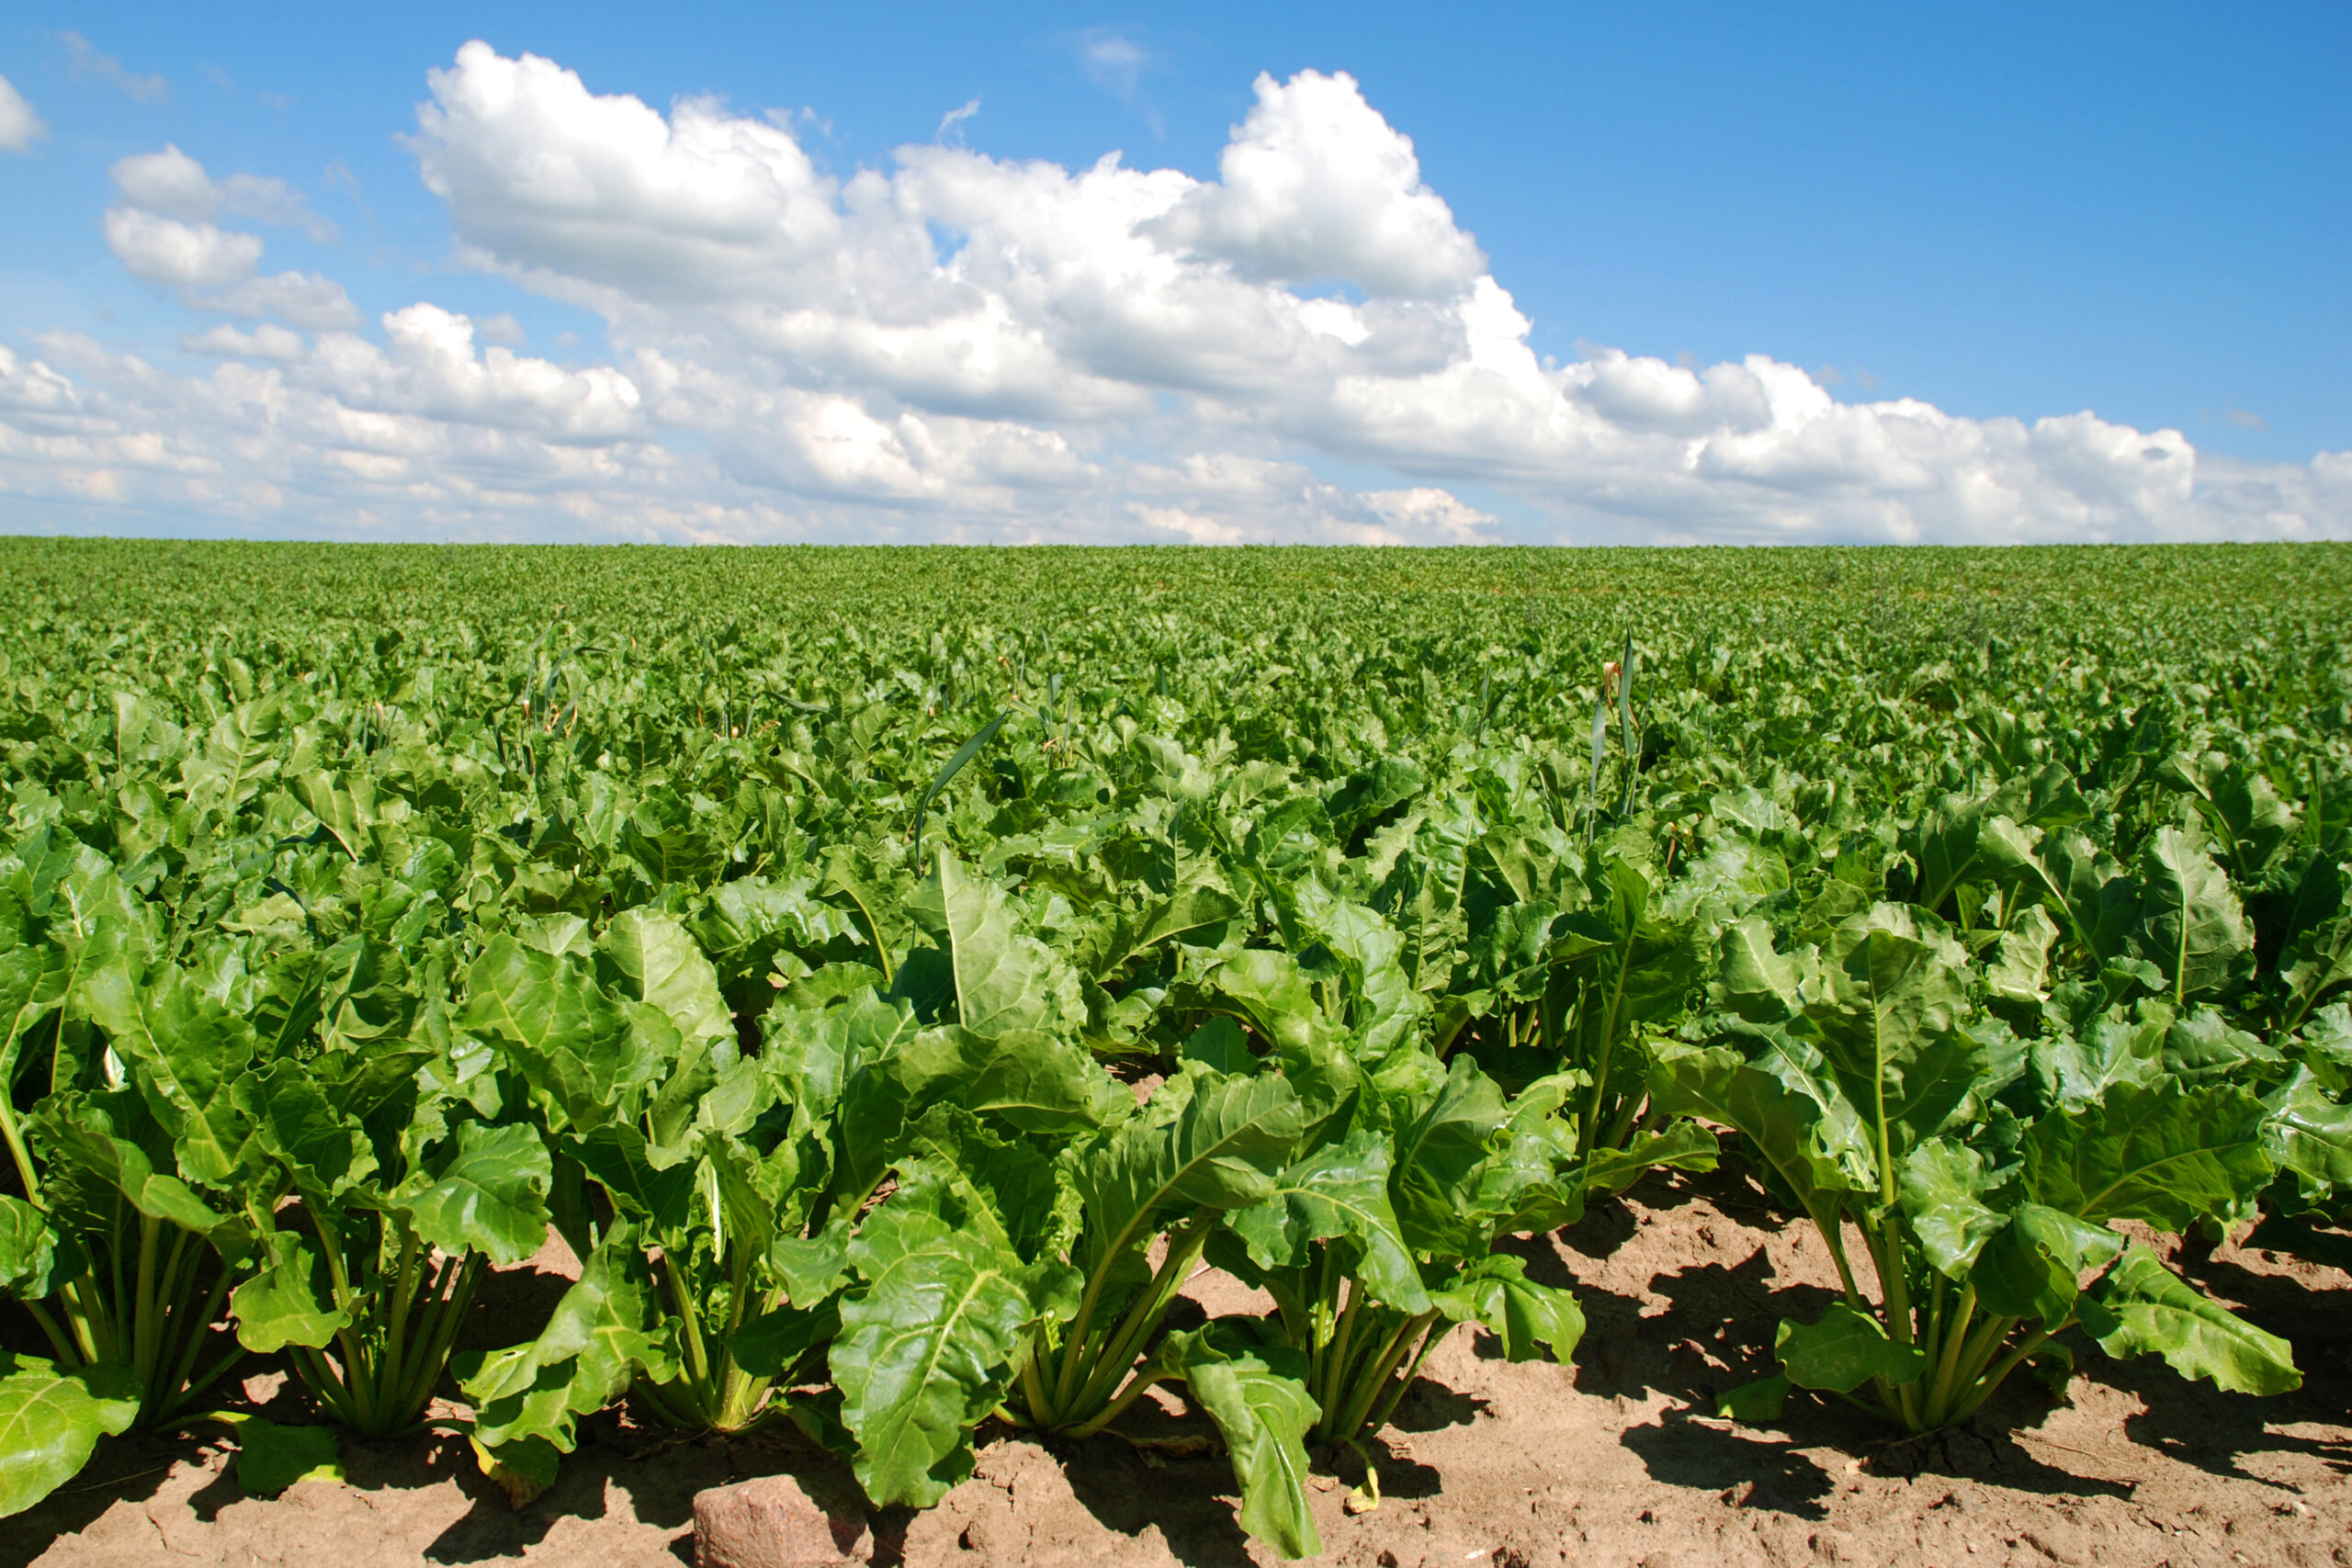 Is your sugar beet thirsty?